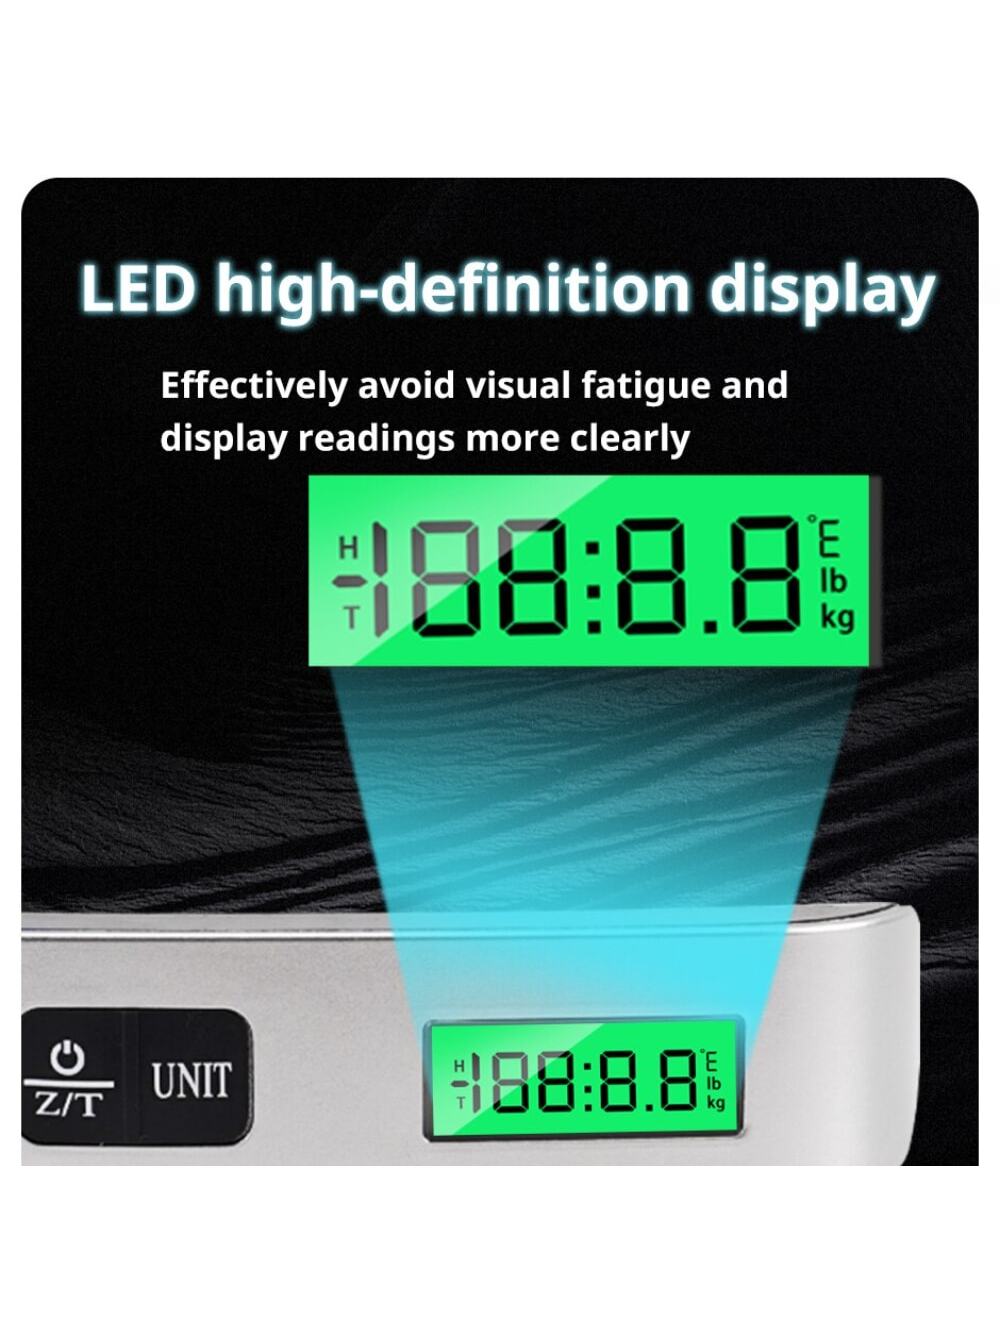 1pcs Portable Scale Digital LCD Display 110lb/50kg Electronic Luggage Hanging Suitcase Travel Weighs Baggage Bag Weight Balance-Silver-9